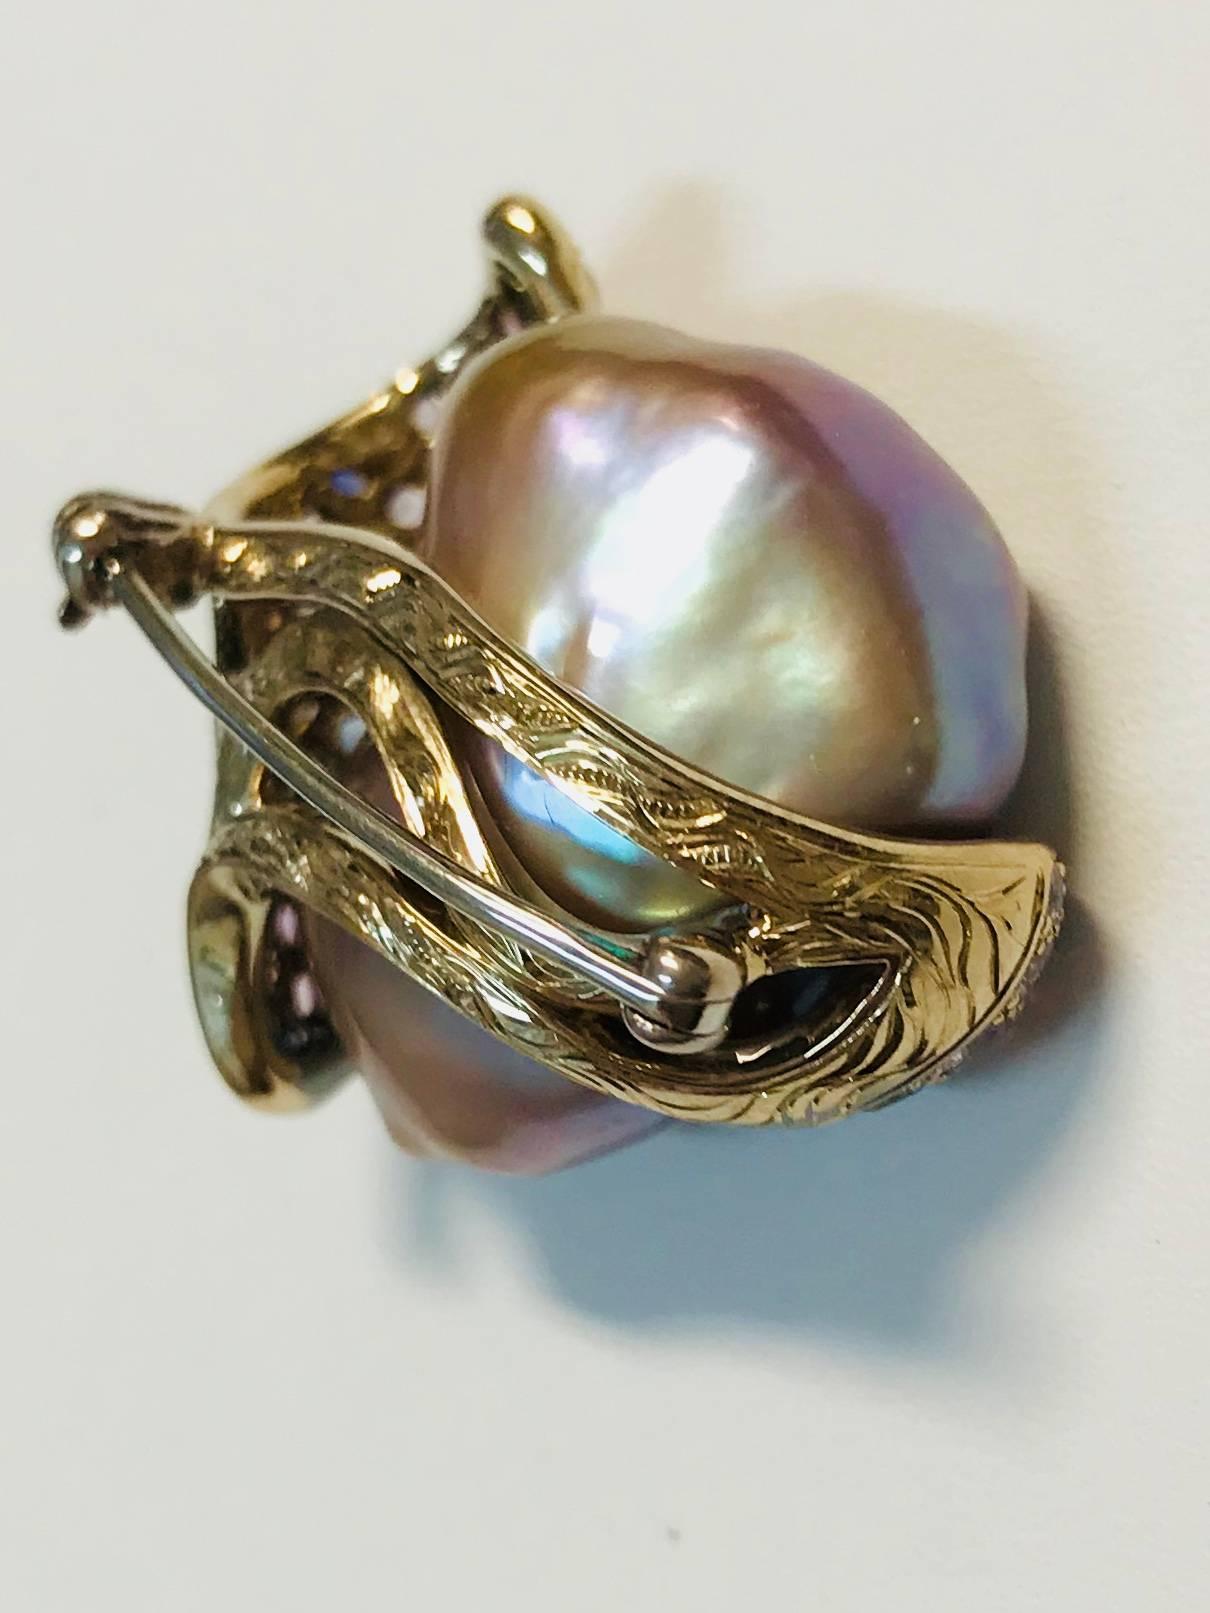 Beautiful Chinese freshwater gray pearl encased in a waved of 18K yellow gold set with approximately 74 multicolored sapphires and diamonds. 

Internationally award winning designer Naomi Sarna creates gem carvings and jewels of unusual beauty. She